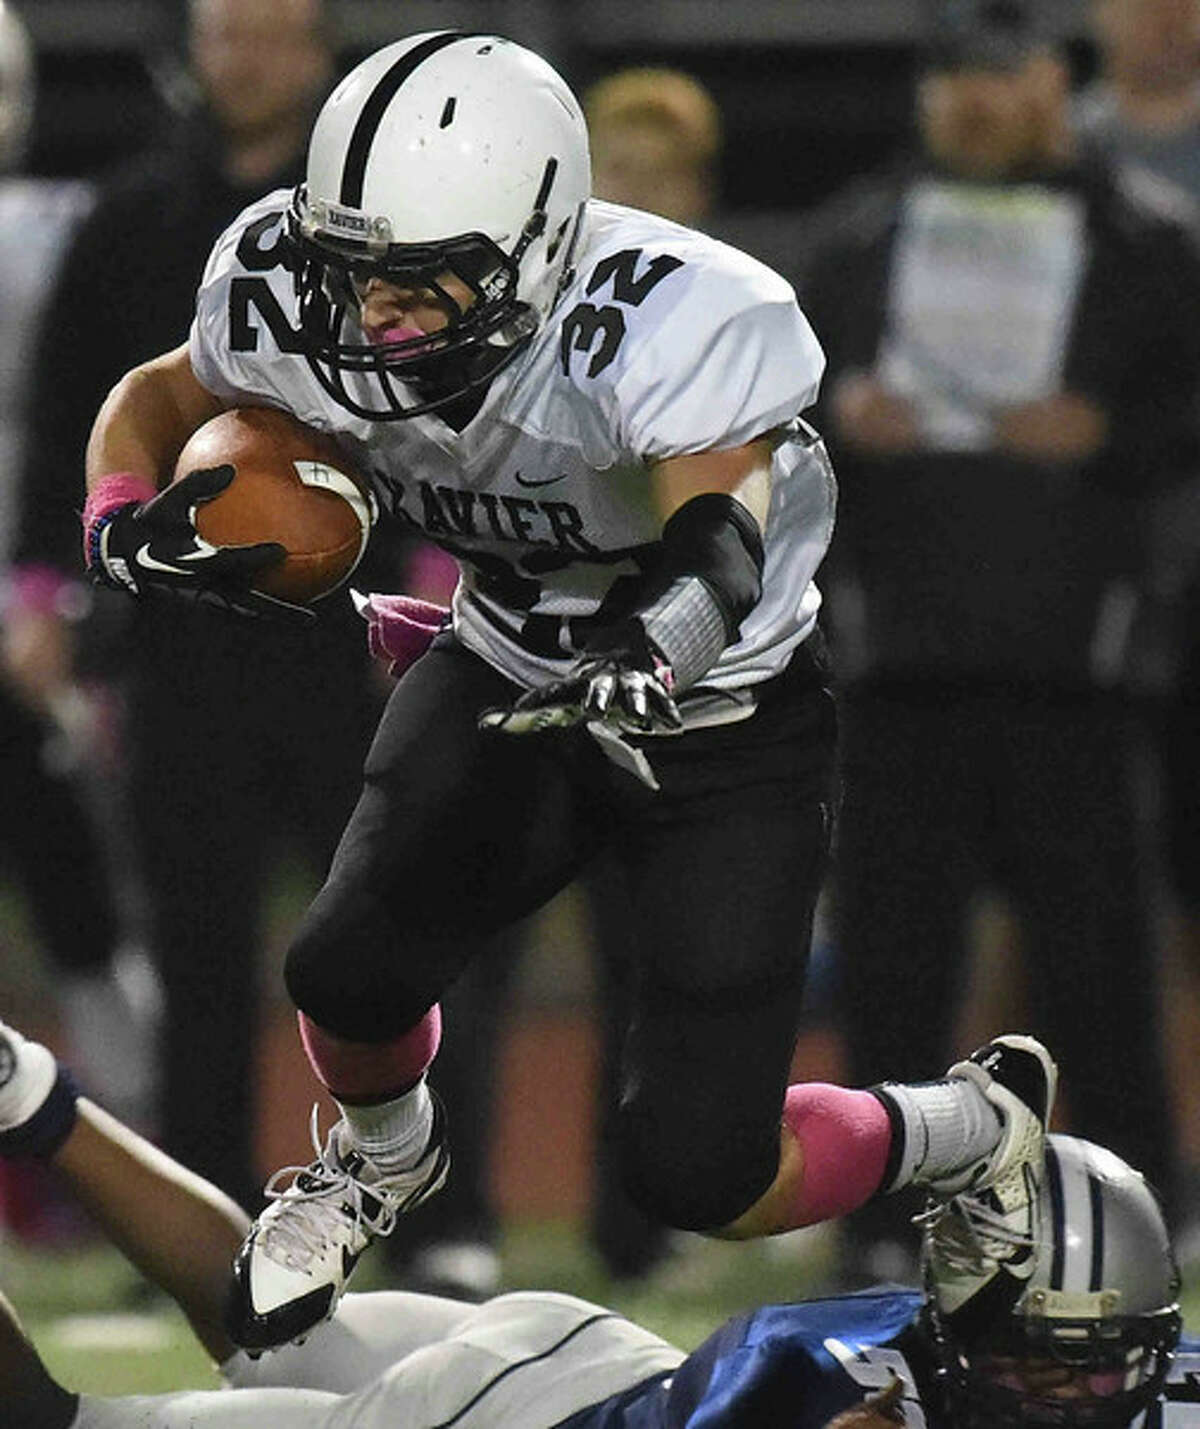 Edwin Luster runs for yardage during Xavier’s 38-6 victory over Hillhouse Friday at SCSU (Peter Hvizdak – New Haven Register)